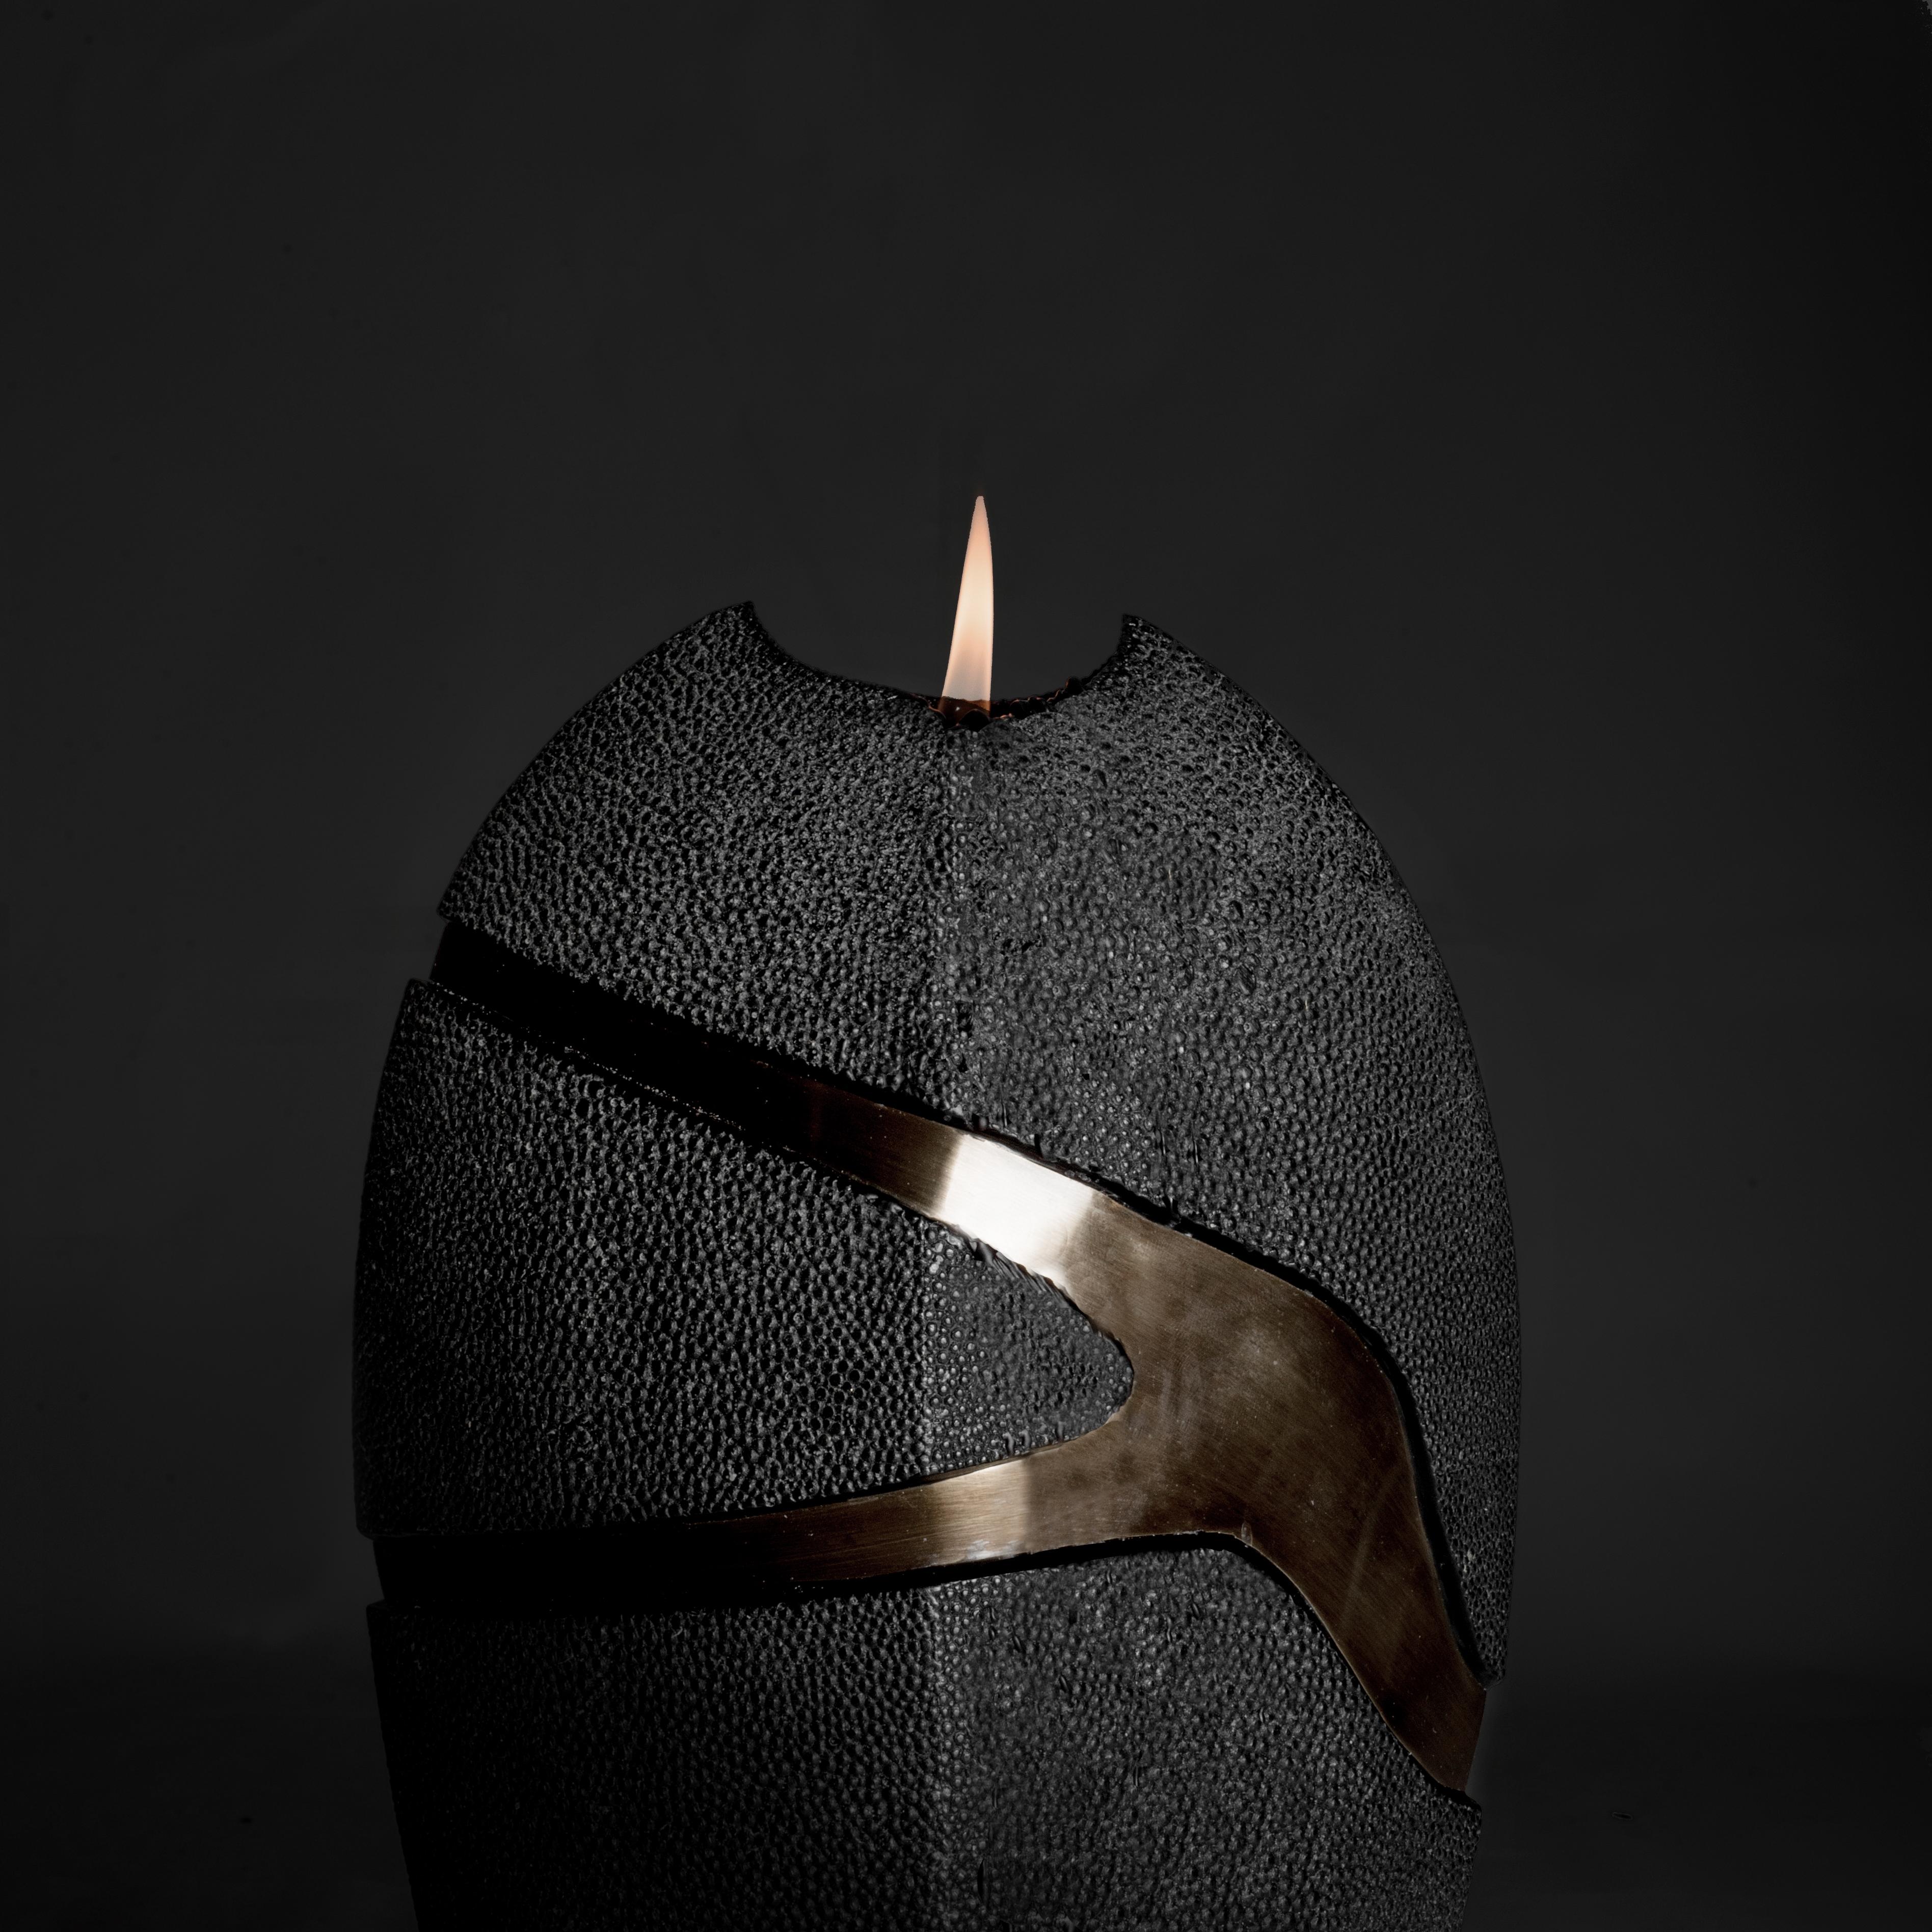 Hand-Crafted Amorphous Candles in Black Shagreen-Textured Wax & Brass by Patrick Coard, Paris For Sale